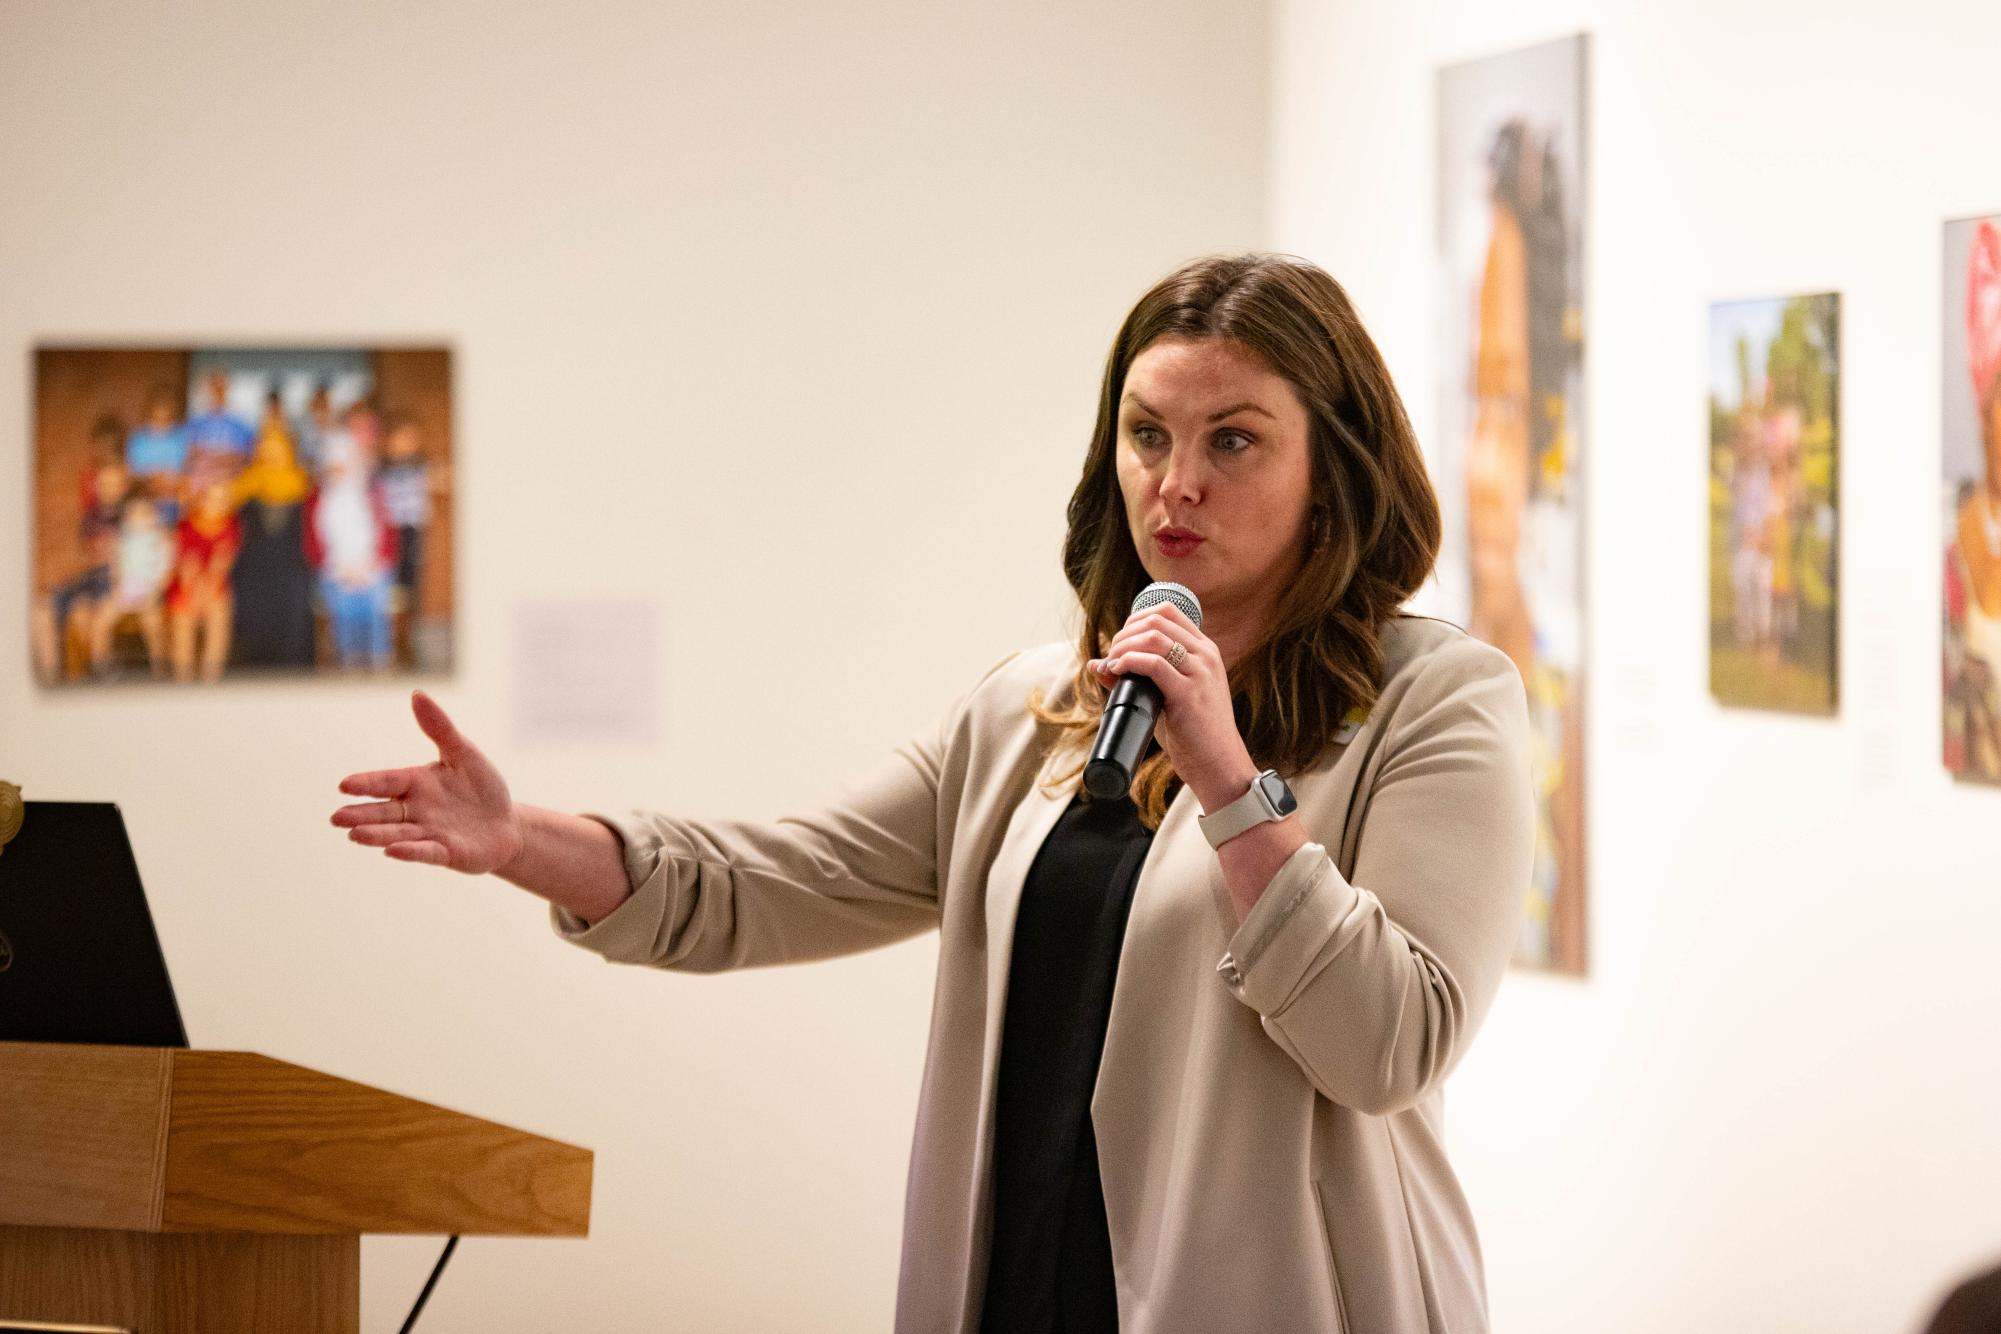 LaTasha St. Arnault, the HumanKind President and CEO, speaks on the issue of homelessness in Kansas at the Ulrich Museum of Art on Sept. 12.